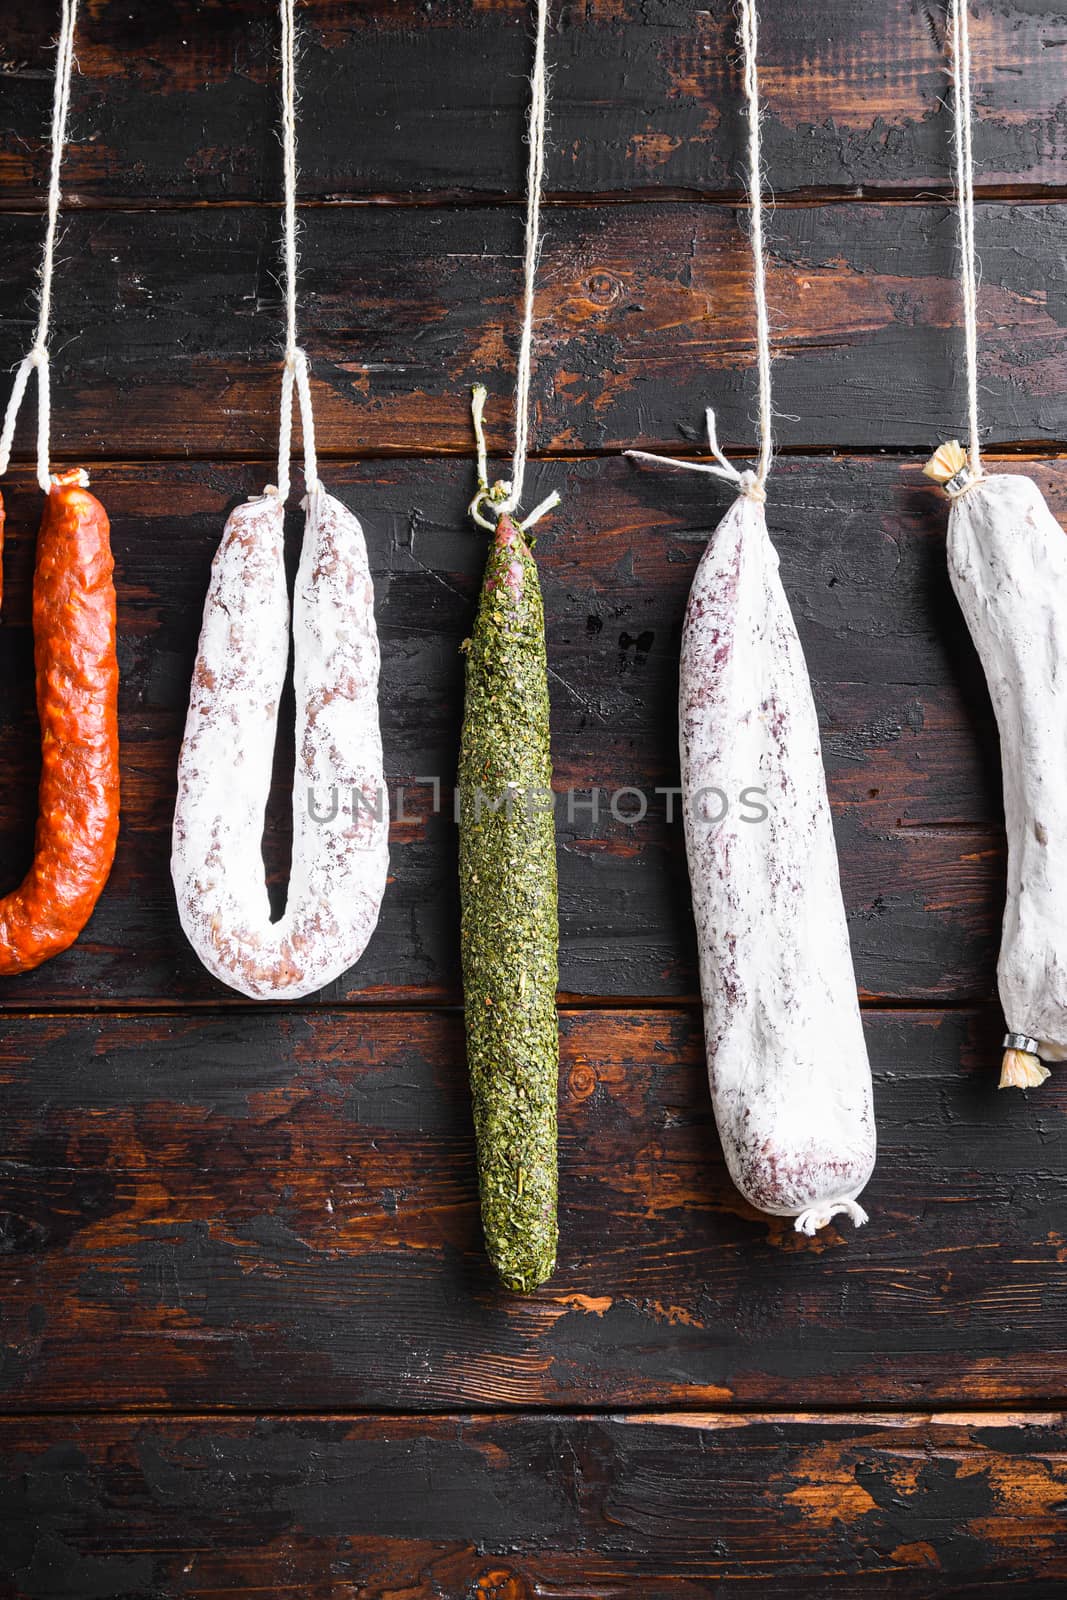 Spanish dry sausages hang from a rack at market on wooden surface.